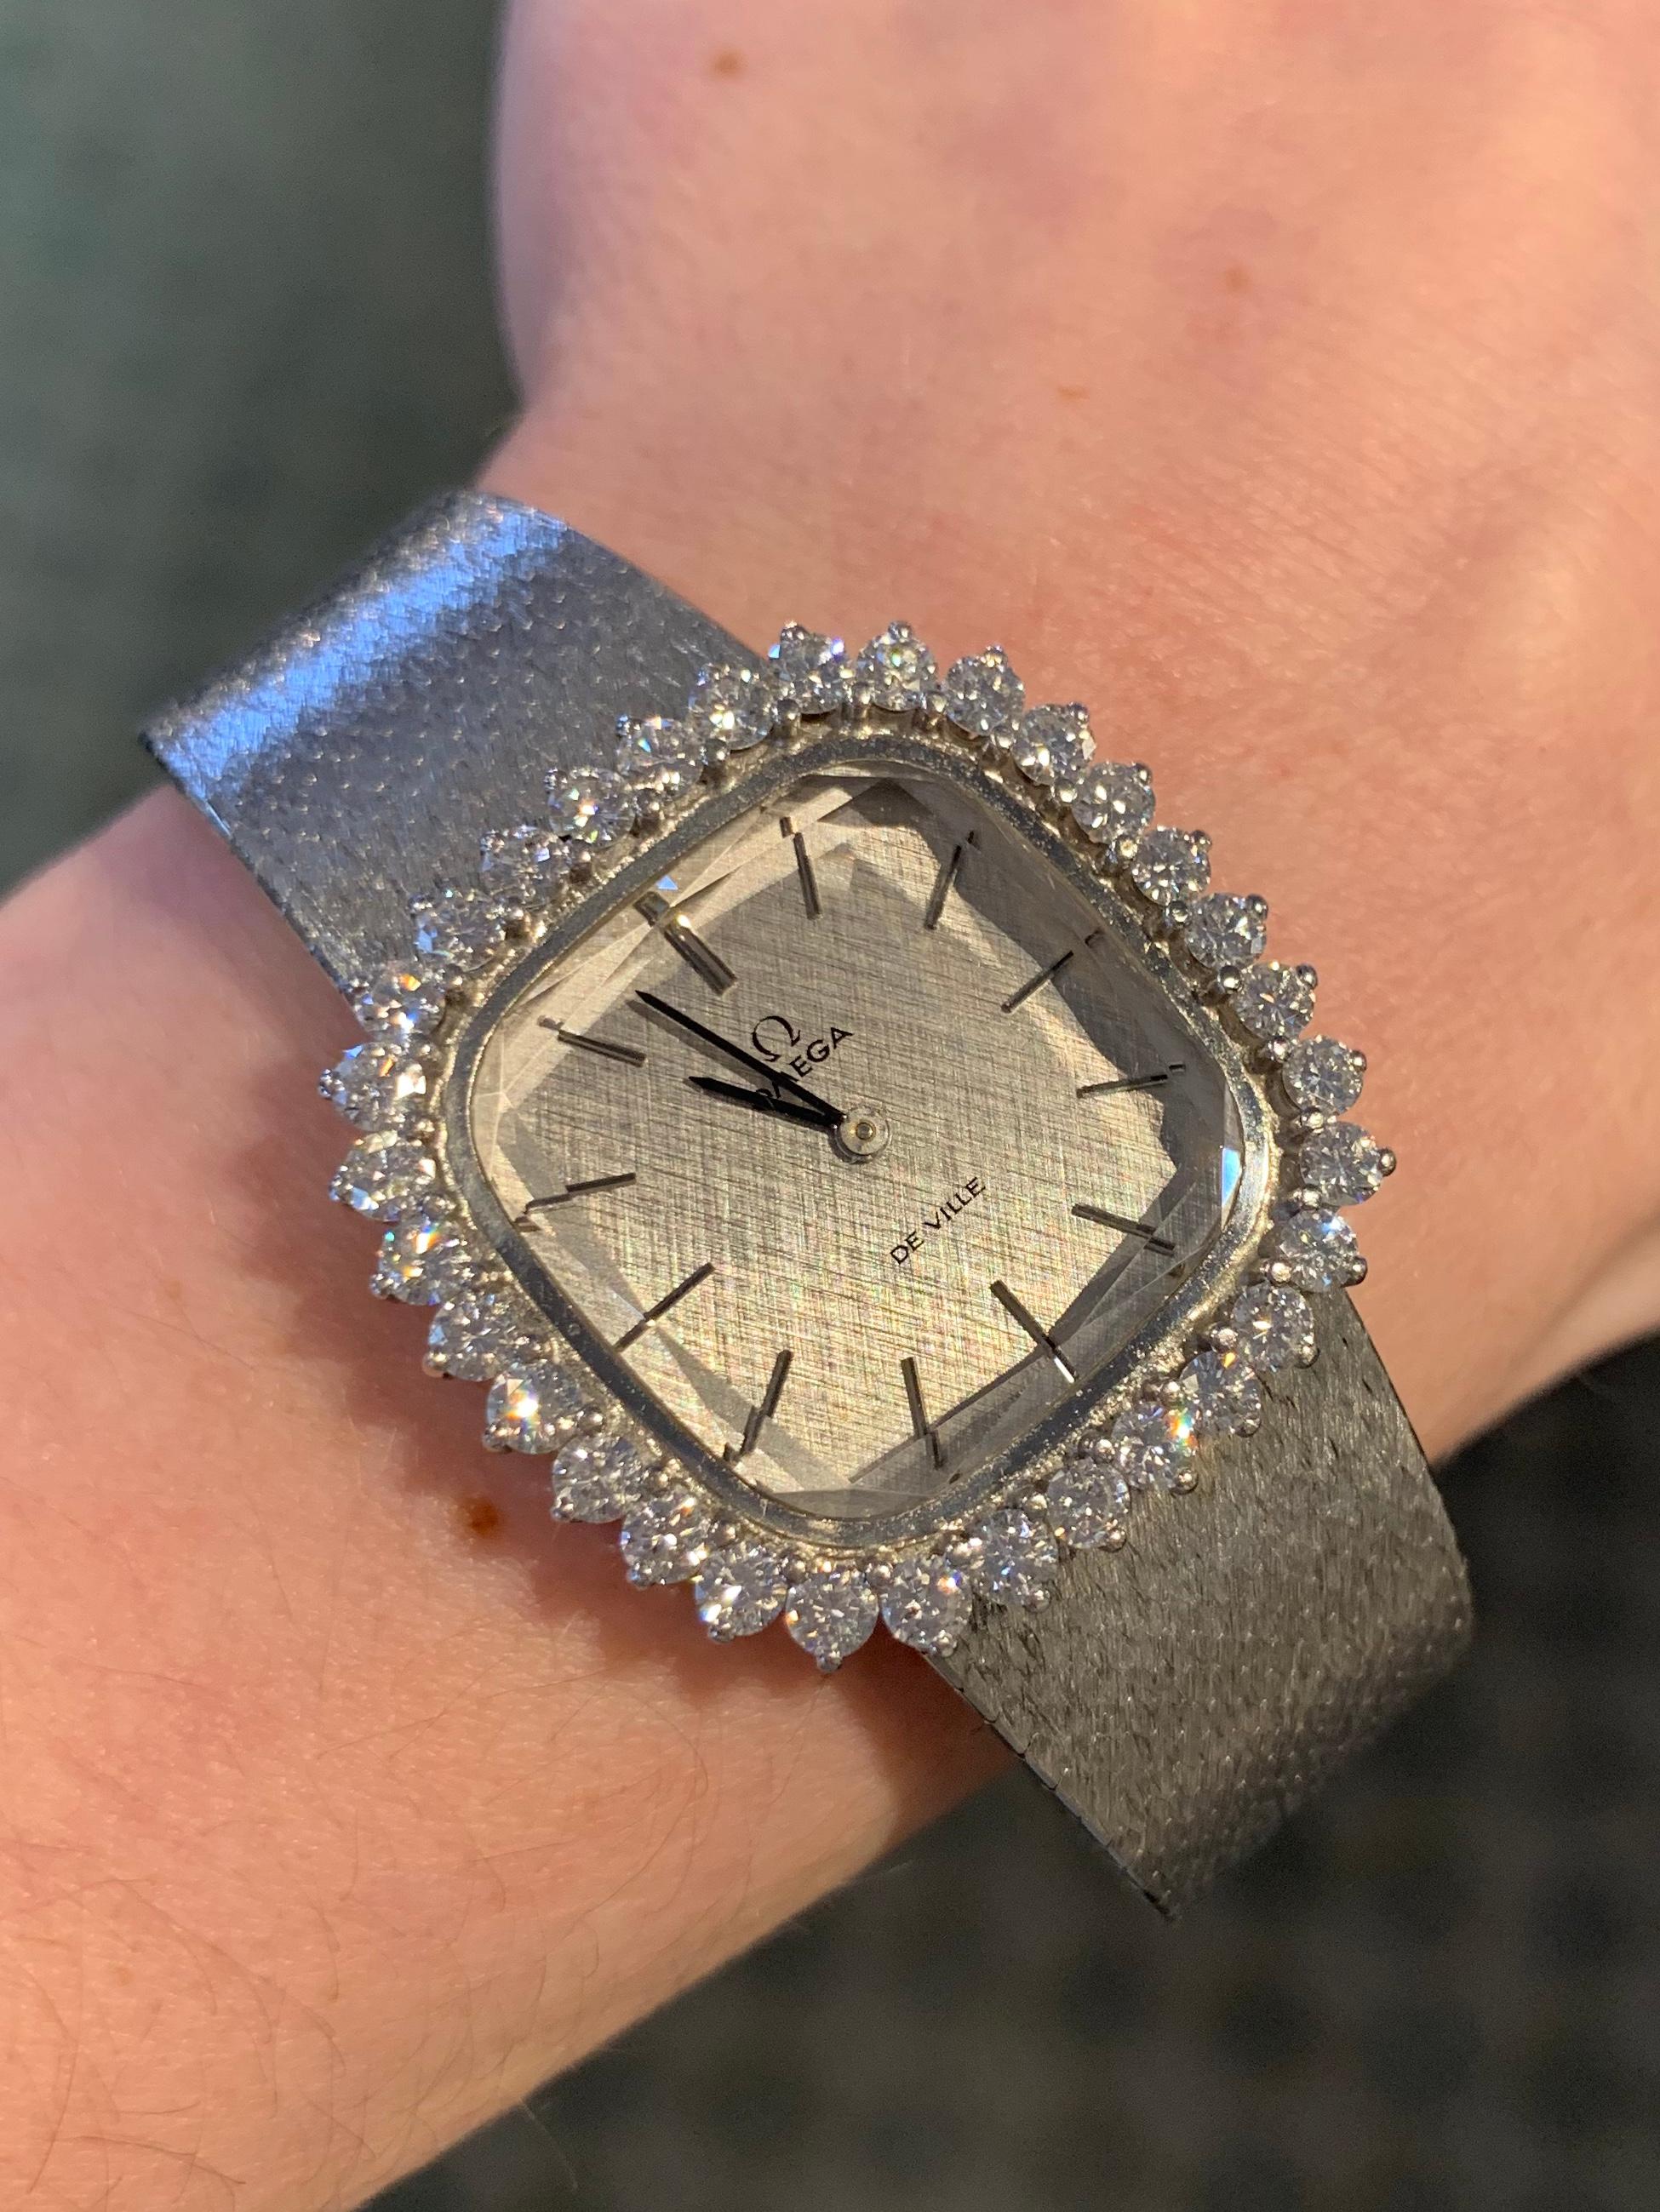 An elegant 18k white gold diamond adorned vintage Omega De Ville mechanical watch with a beautifully carved sapphire crystal. Watch dial is decorated with a beautiful etched silver Florentine finish and features polished stick hour marks. The 28mm